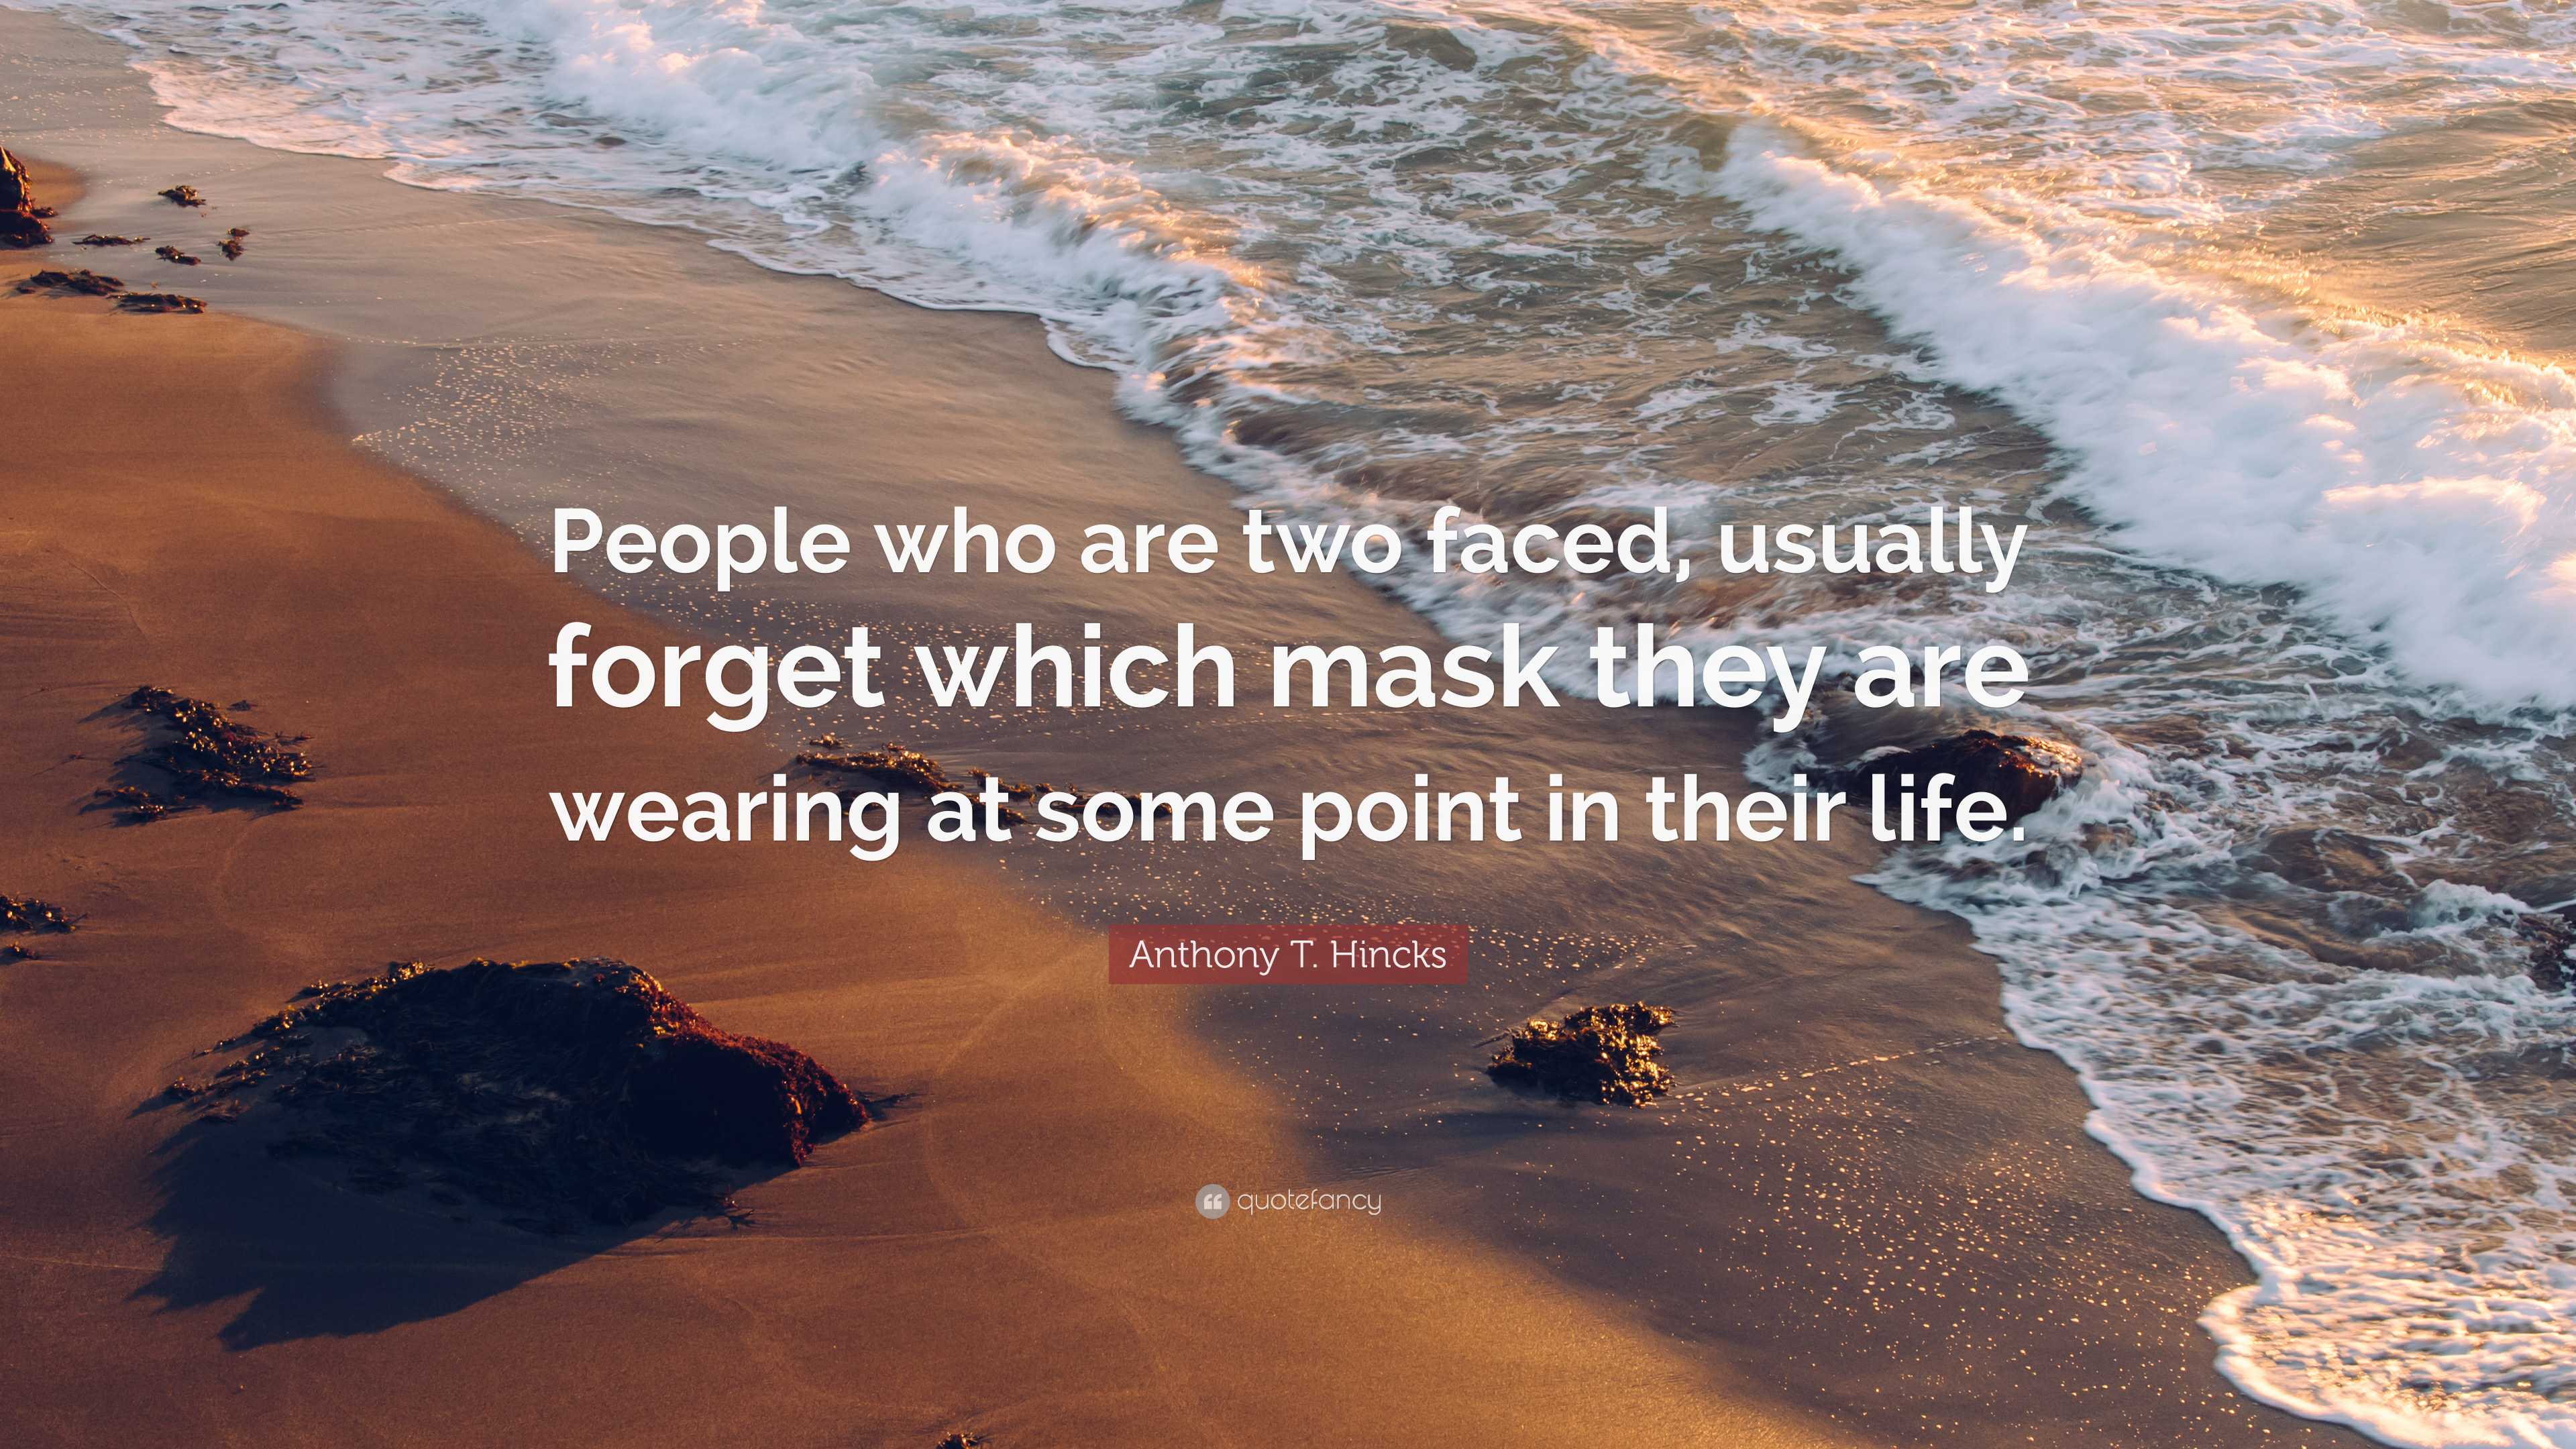 Anthony T. Hincks Quote: “People who are two faced, usually forget which  mask they are wearing